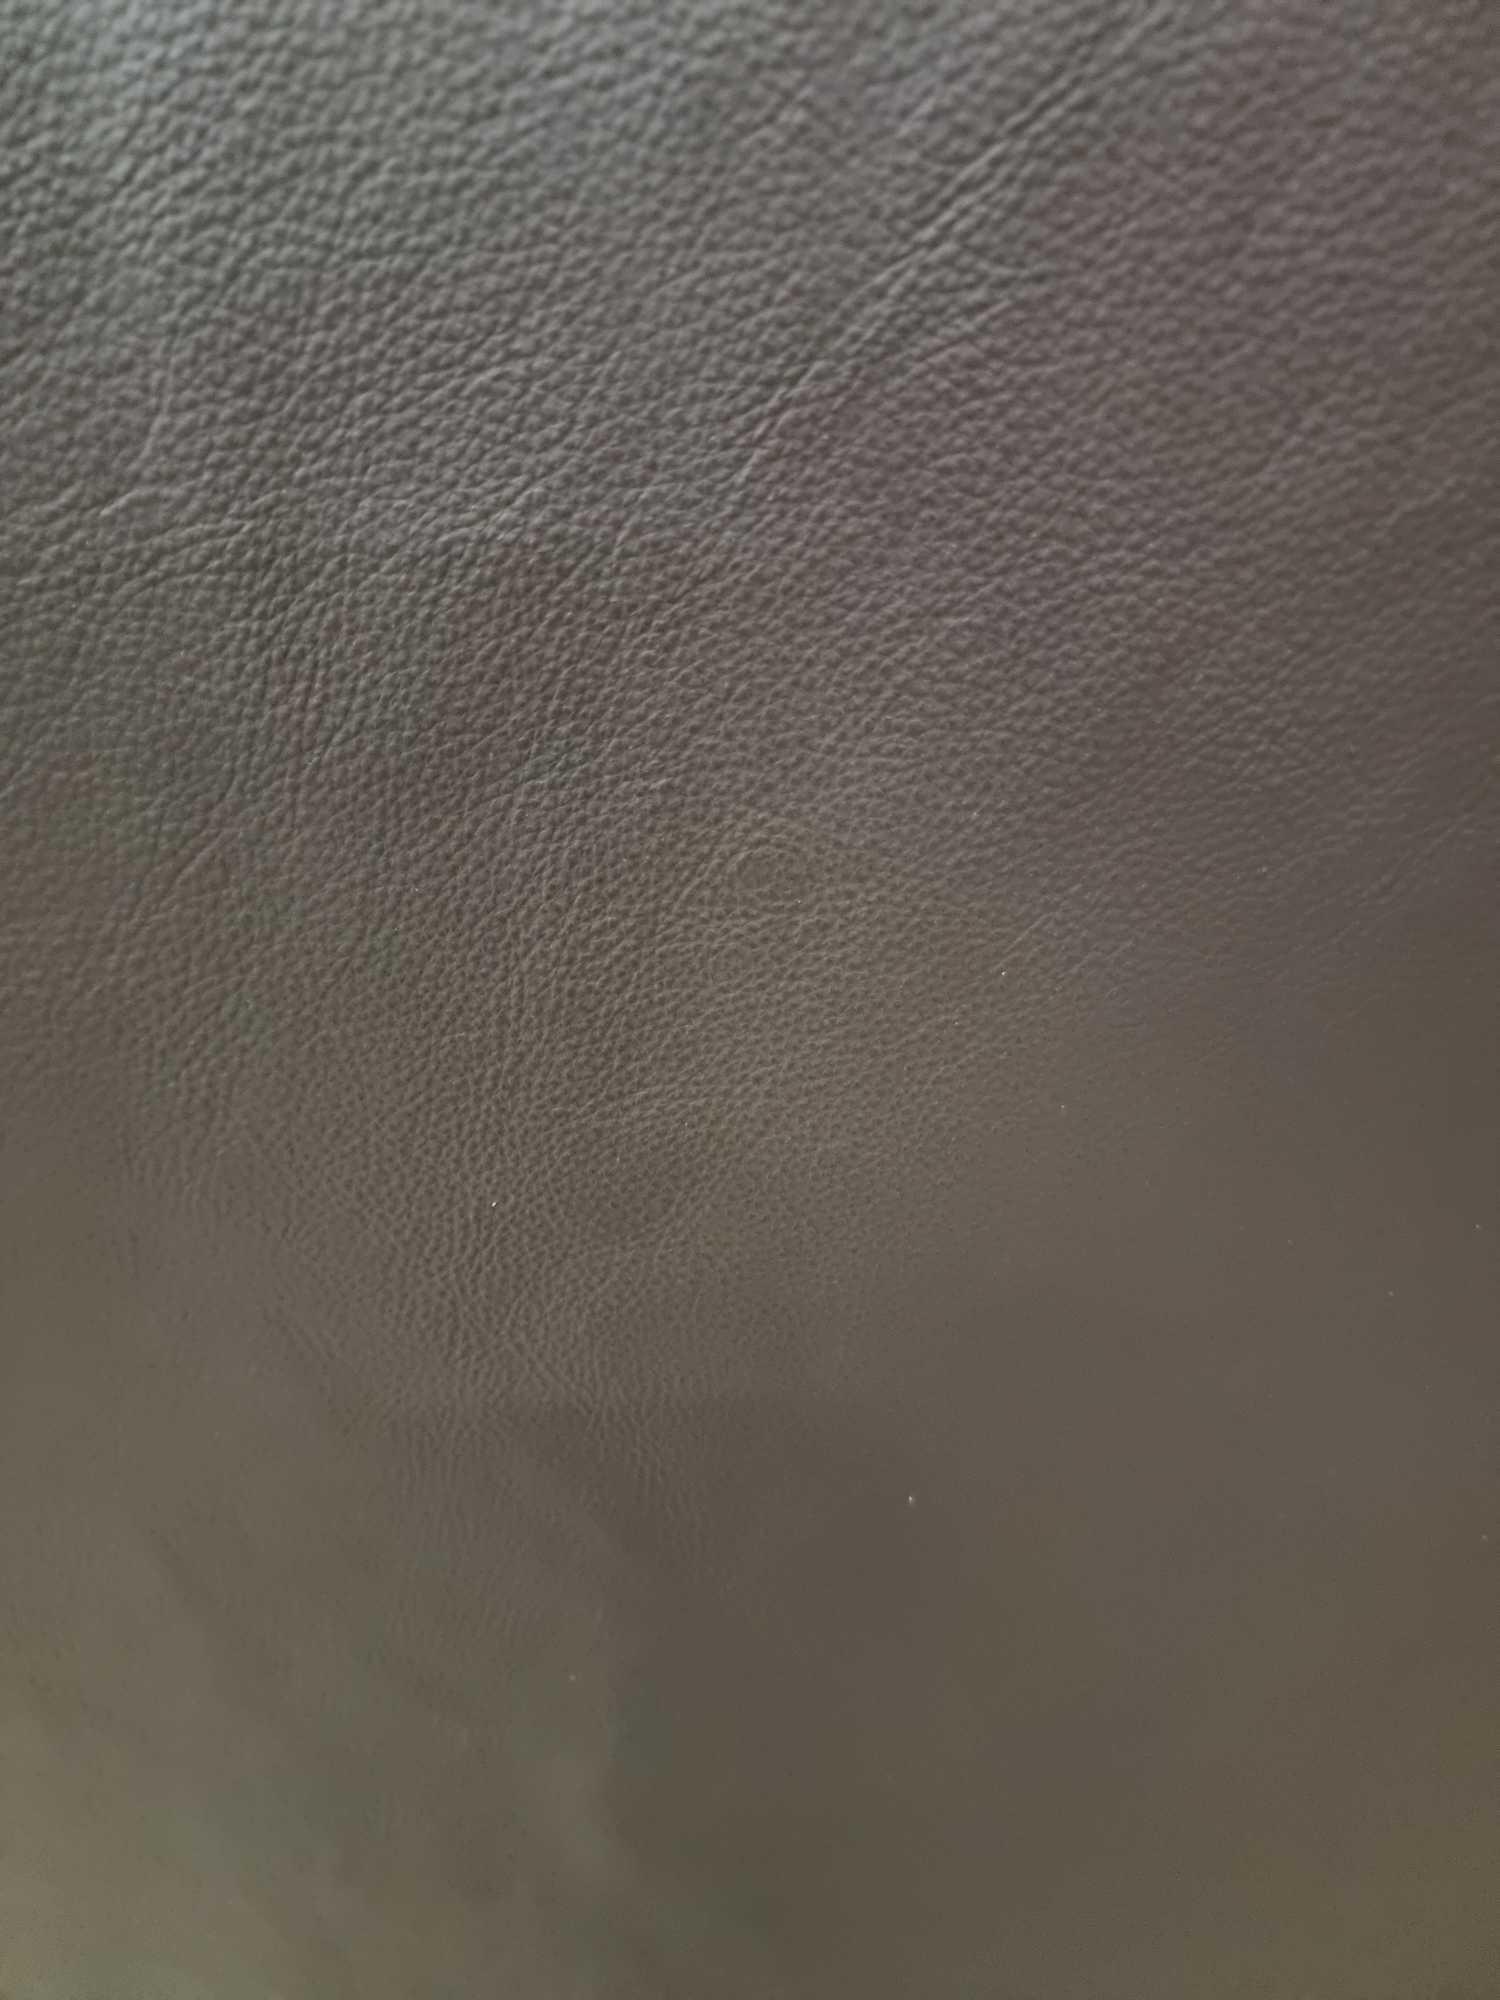 Yarwood Hammersmith Chocolate Leather Hide approximately 3 84M2 2 4 x 1 6cm ( Hide No,85) - Image 2 of 2